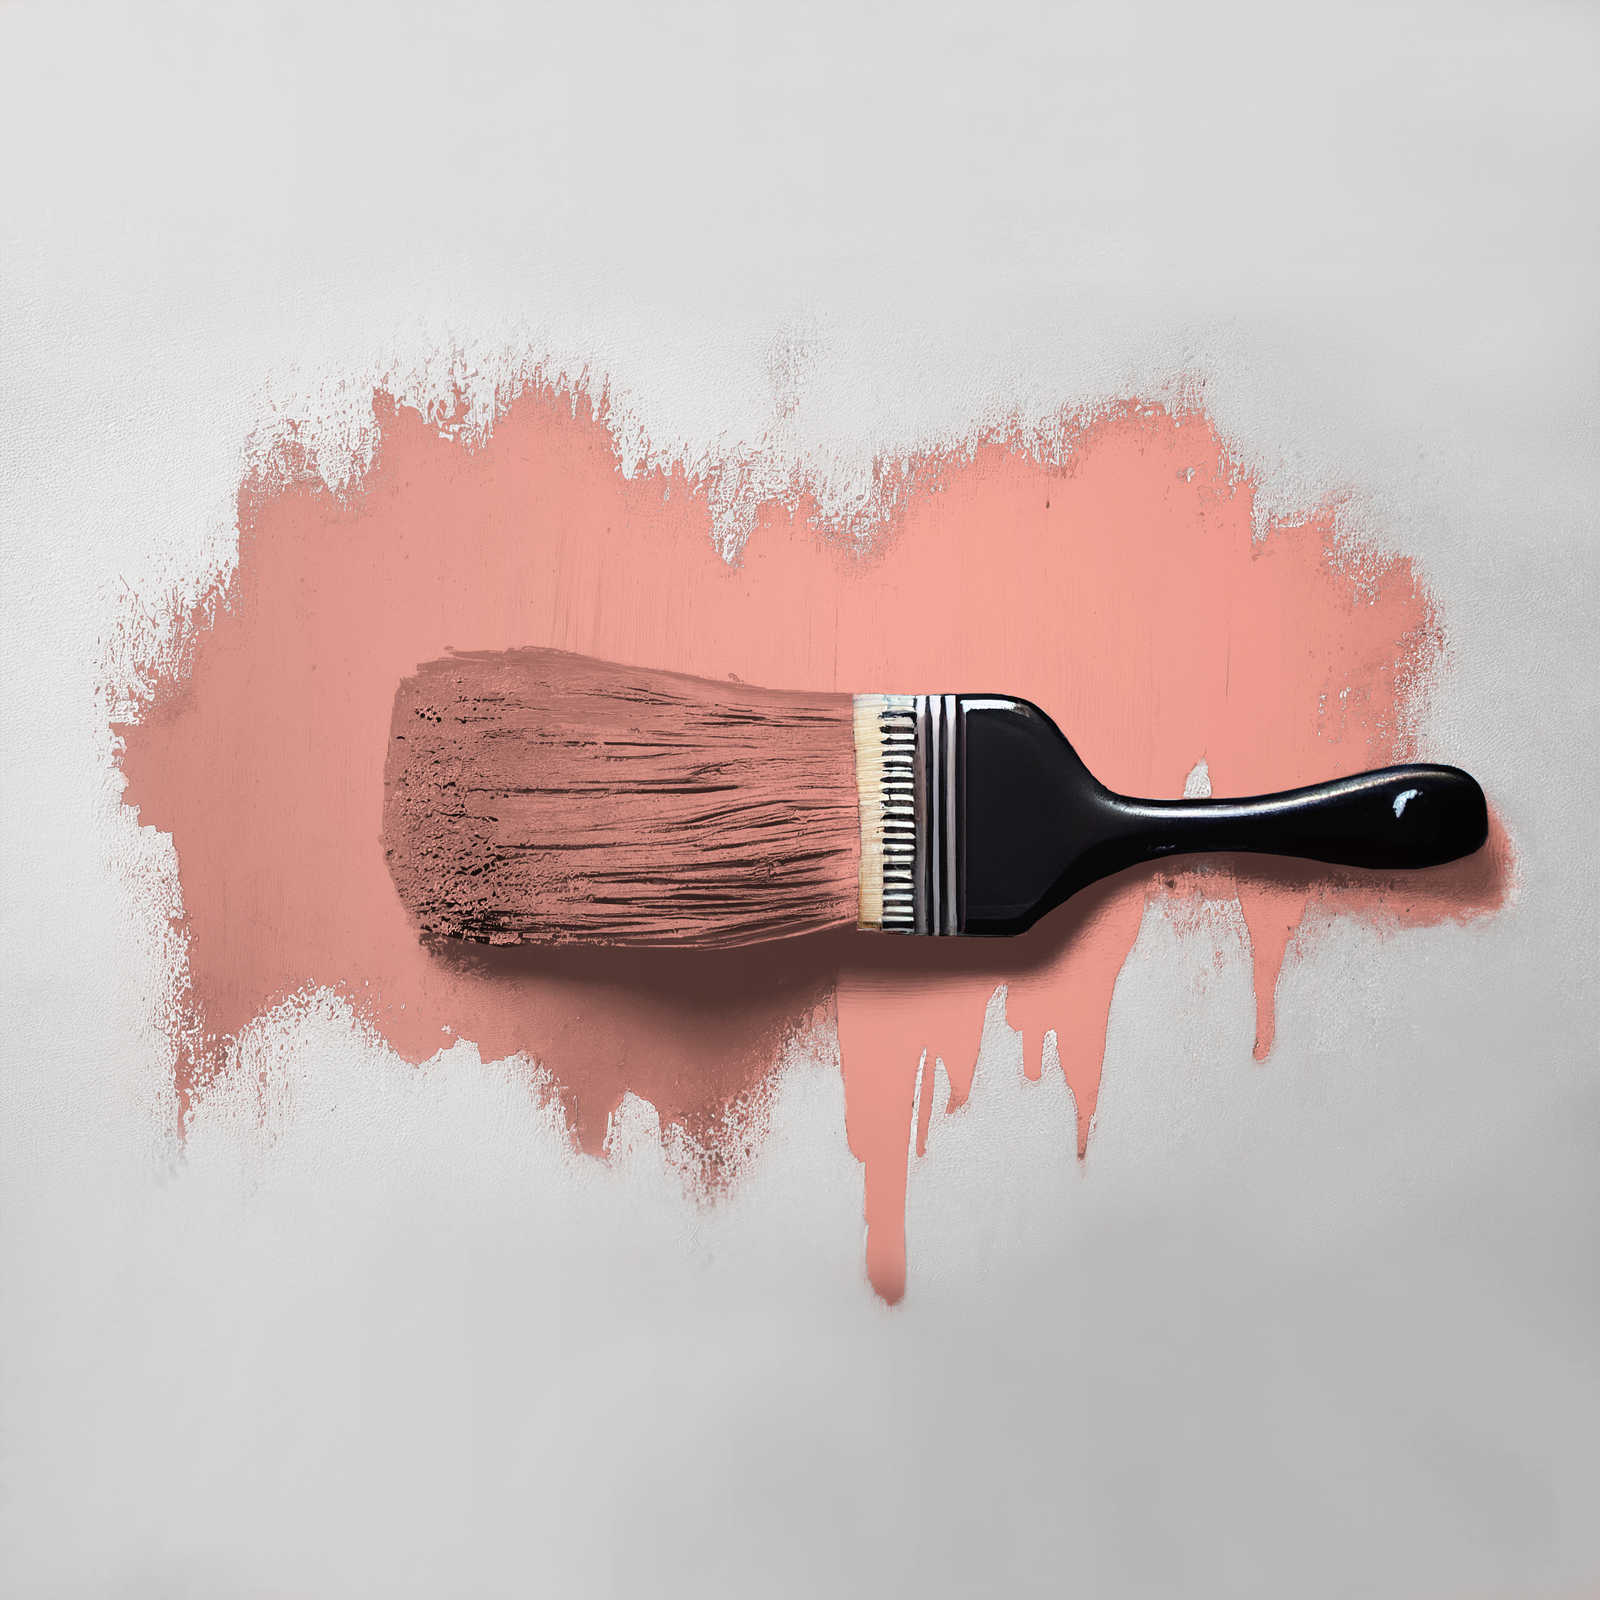             Wall Paint TCK7004 »Georgeous Grapefruit« in bright coral – 2.5 litre
        